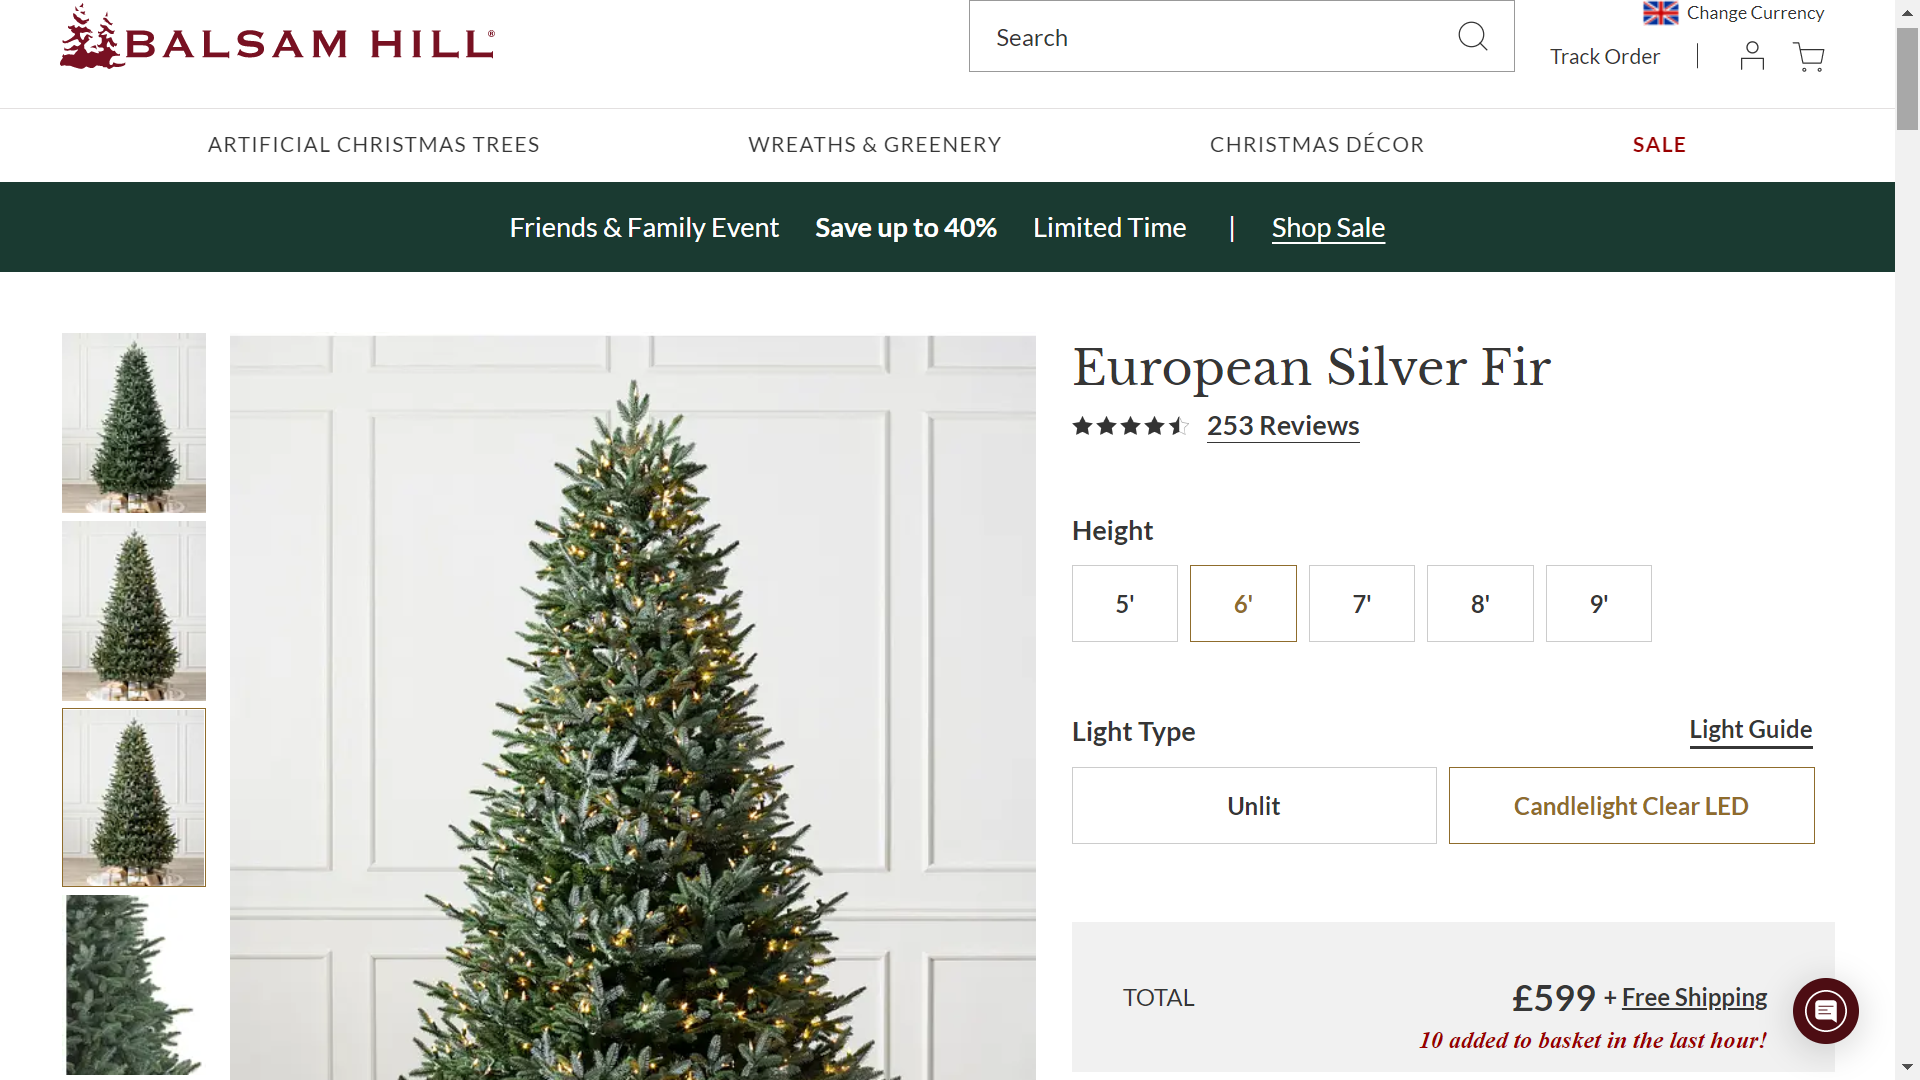 BH (The worlds leading Christmas Tree Brand) European Silver Fir 6' Tree with LED Clear Lights - Image 2 of 2